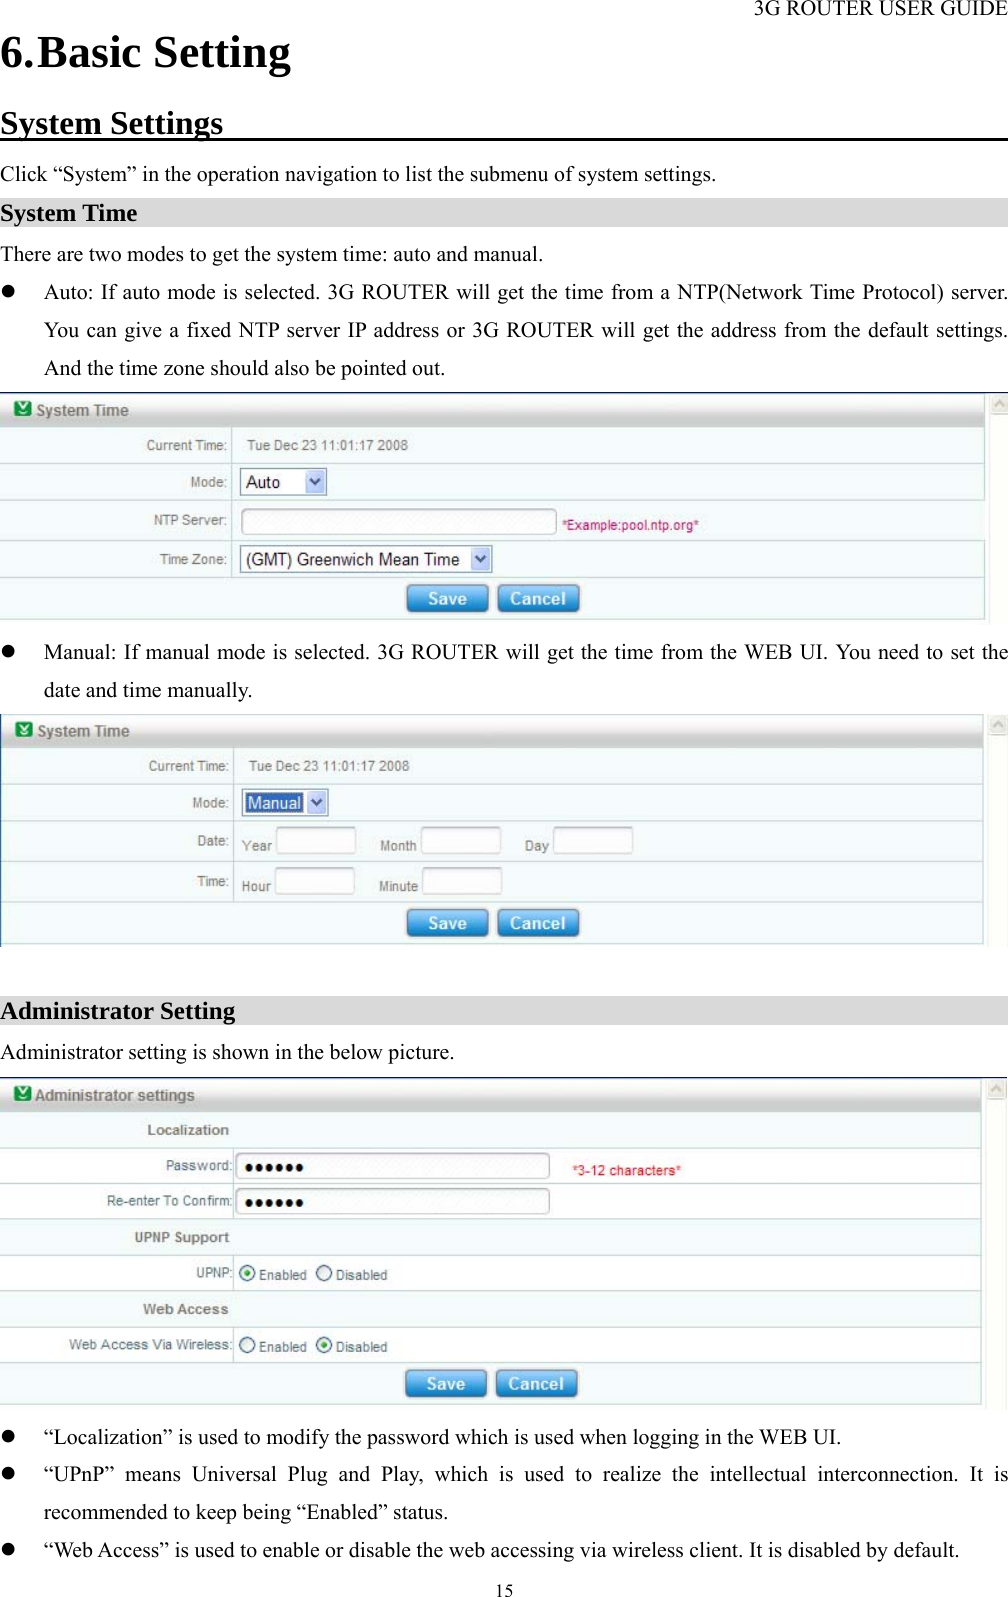 3G ROUTER USER GUIDE  156. Basic Setting System Settings                                                 Click “System” in the operation navigation to list the submenu of system settings. System Time                                                                        There are two modes to get the system time: auto and manual. z Auto: If auto mode is selected. 3G ROUTER will get the time from a NTP(Network Time Protocol) server. You can give a fixed NTP server IP address or 3G ROUTER will get the address from the default settings. And the time zone should also be pointed out.  z Manual: If manual mode is selected. 3G ROUTER will get the time from the WEB UI. You need to set the date and time manually.   Administrator Setting                                                                Administrator setting is shown in the below picture.  z “Localization” is used to modify the password which is used when logging in the WEB UI.   z “UPnP” means Universal Plug and Play, which is used to realize the intellectual interconnection. It is recommended to keep being “Enabled” status.   z “Web Access” is used to enable or disable the web accessing via wireless client. It is disabled by default. 